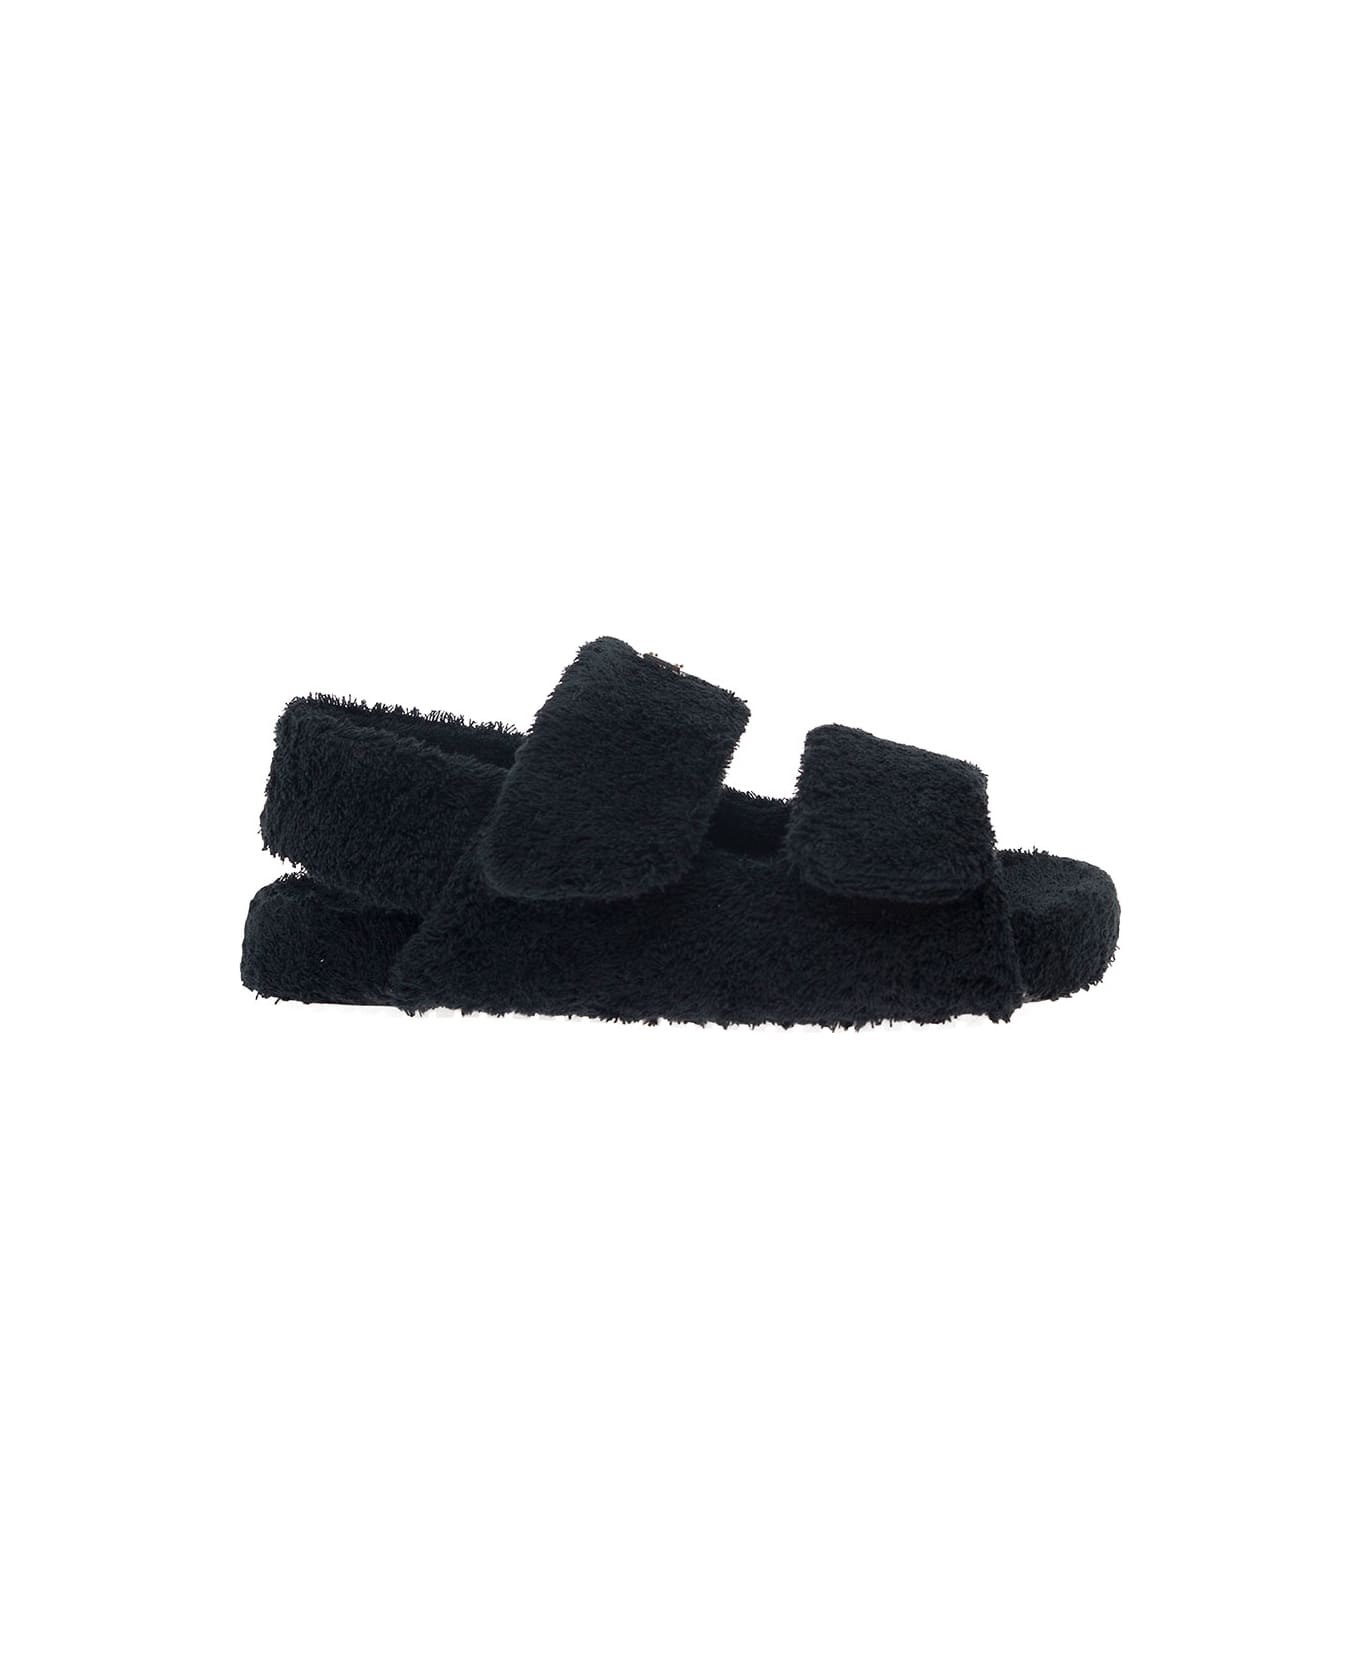 Dolce & Gabbana Black Sandals With Logo Plaque And Hook-and-loop Fastening In Terrycloth Man - Black その他各種シューズ